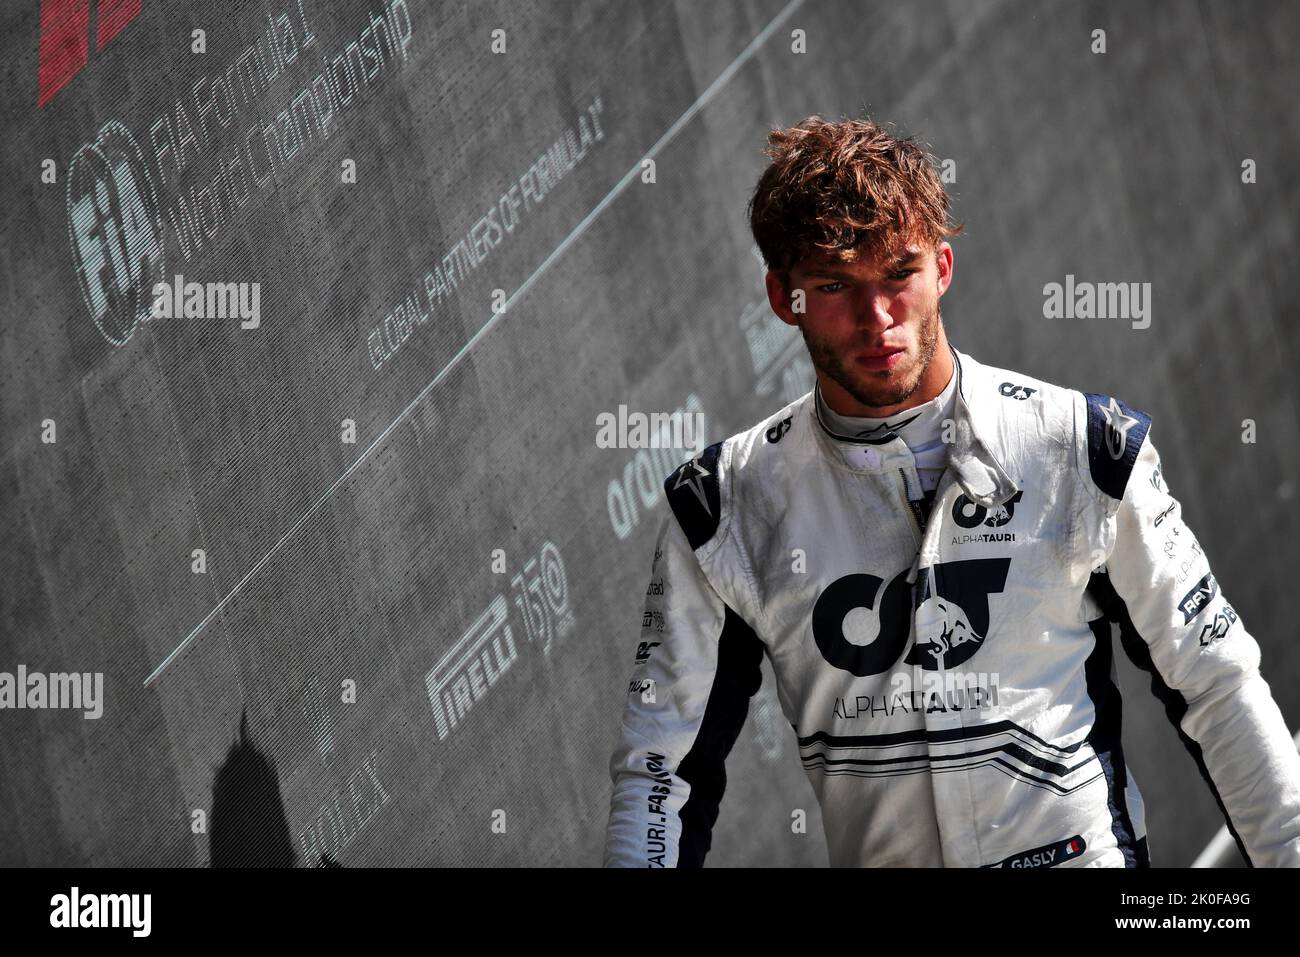 Monza, Italy. 11th Sep, 2022. Pierre Gasly (FRA) AlphaTauri in parc ferme. Italian Grand Prix, Sunday 11th September 2022. Monza Italy. Credit: James Moy/Alamy Live News Stock Photo